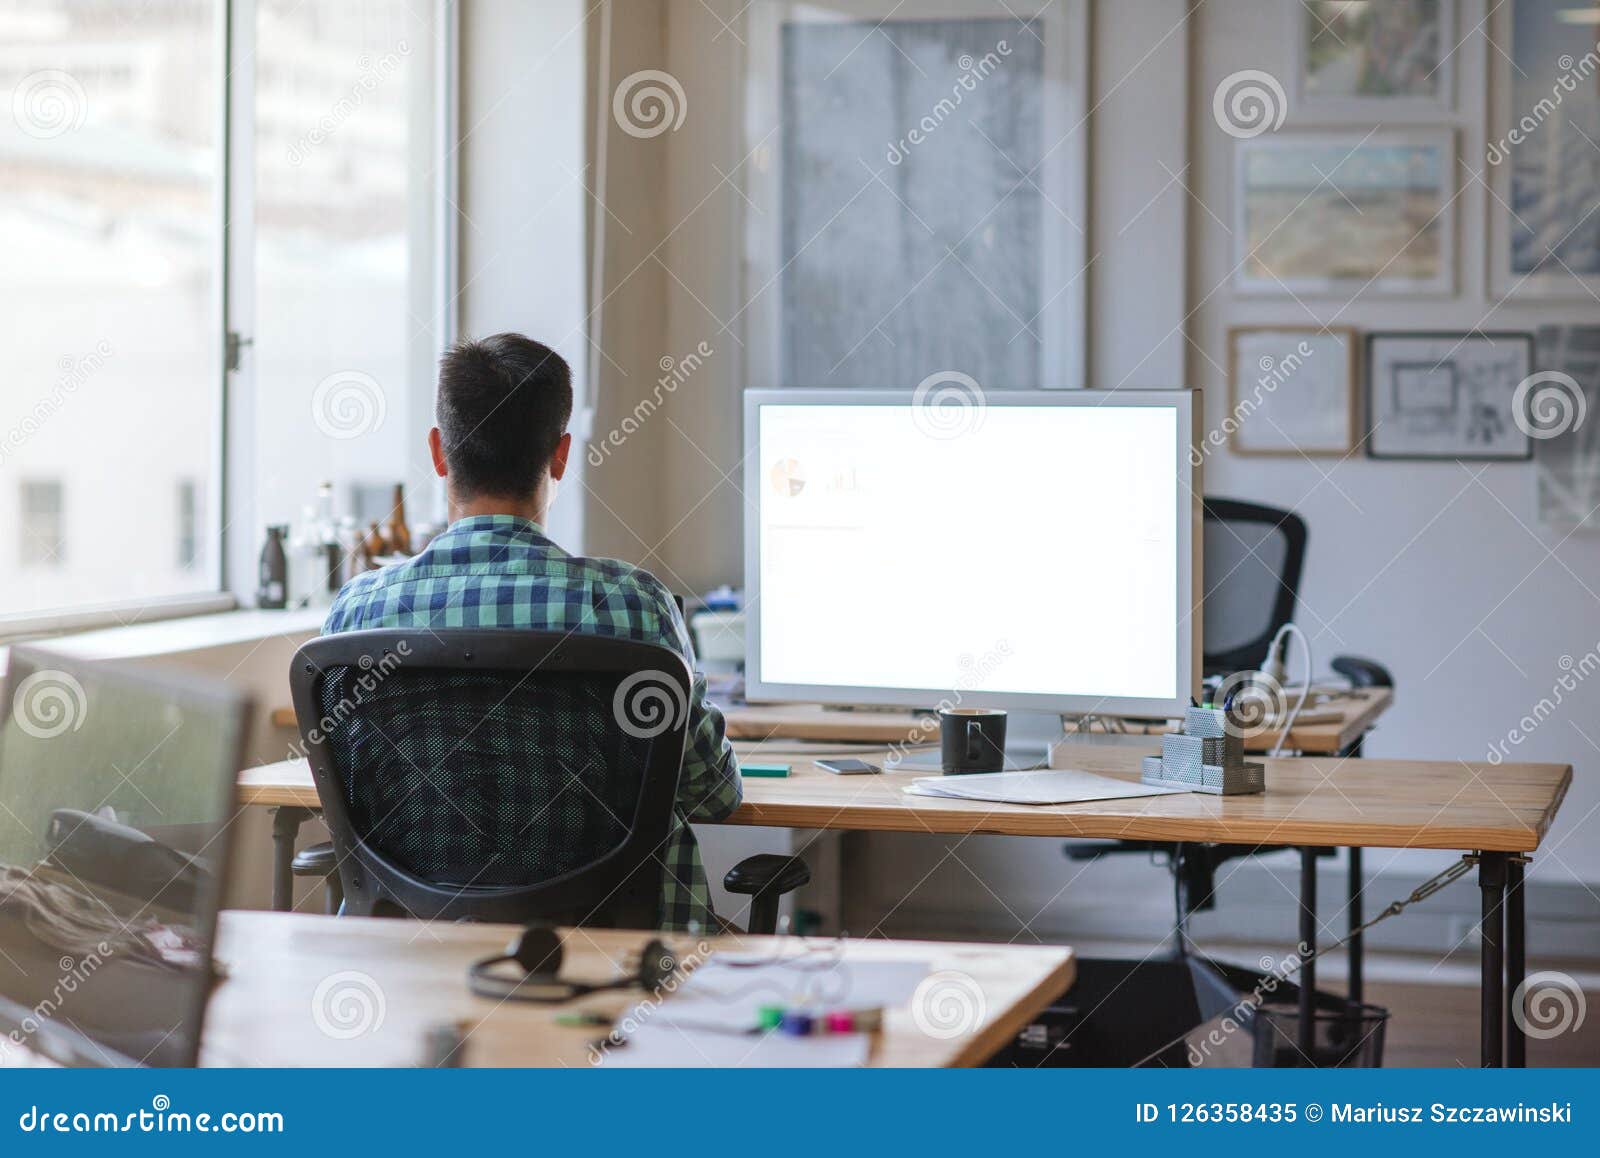 Young Designer Working Late At His Desk In An Office Stock Image